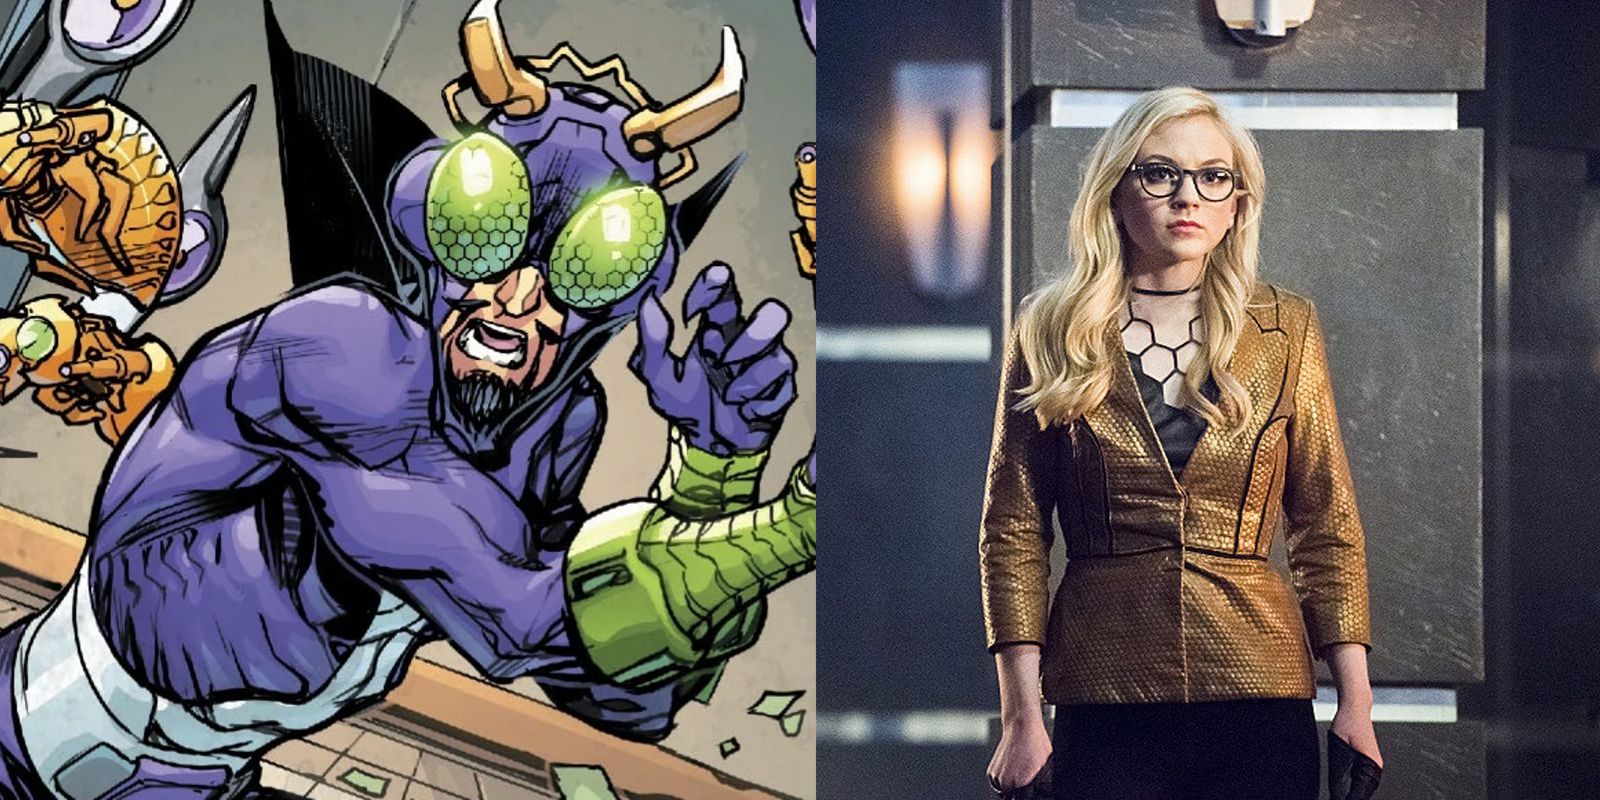 Bug-Eyed Bandit from DC Comics and the Arrowverse